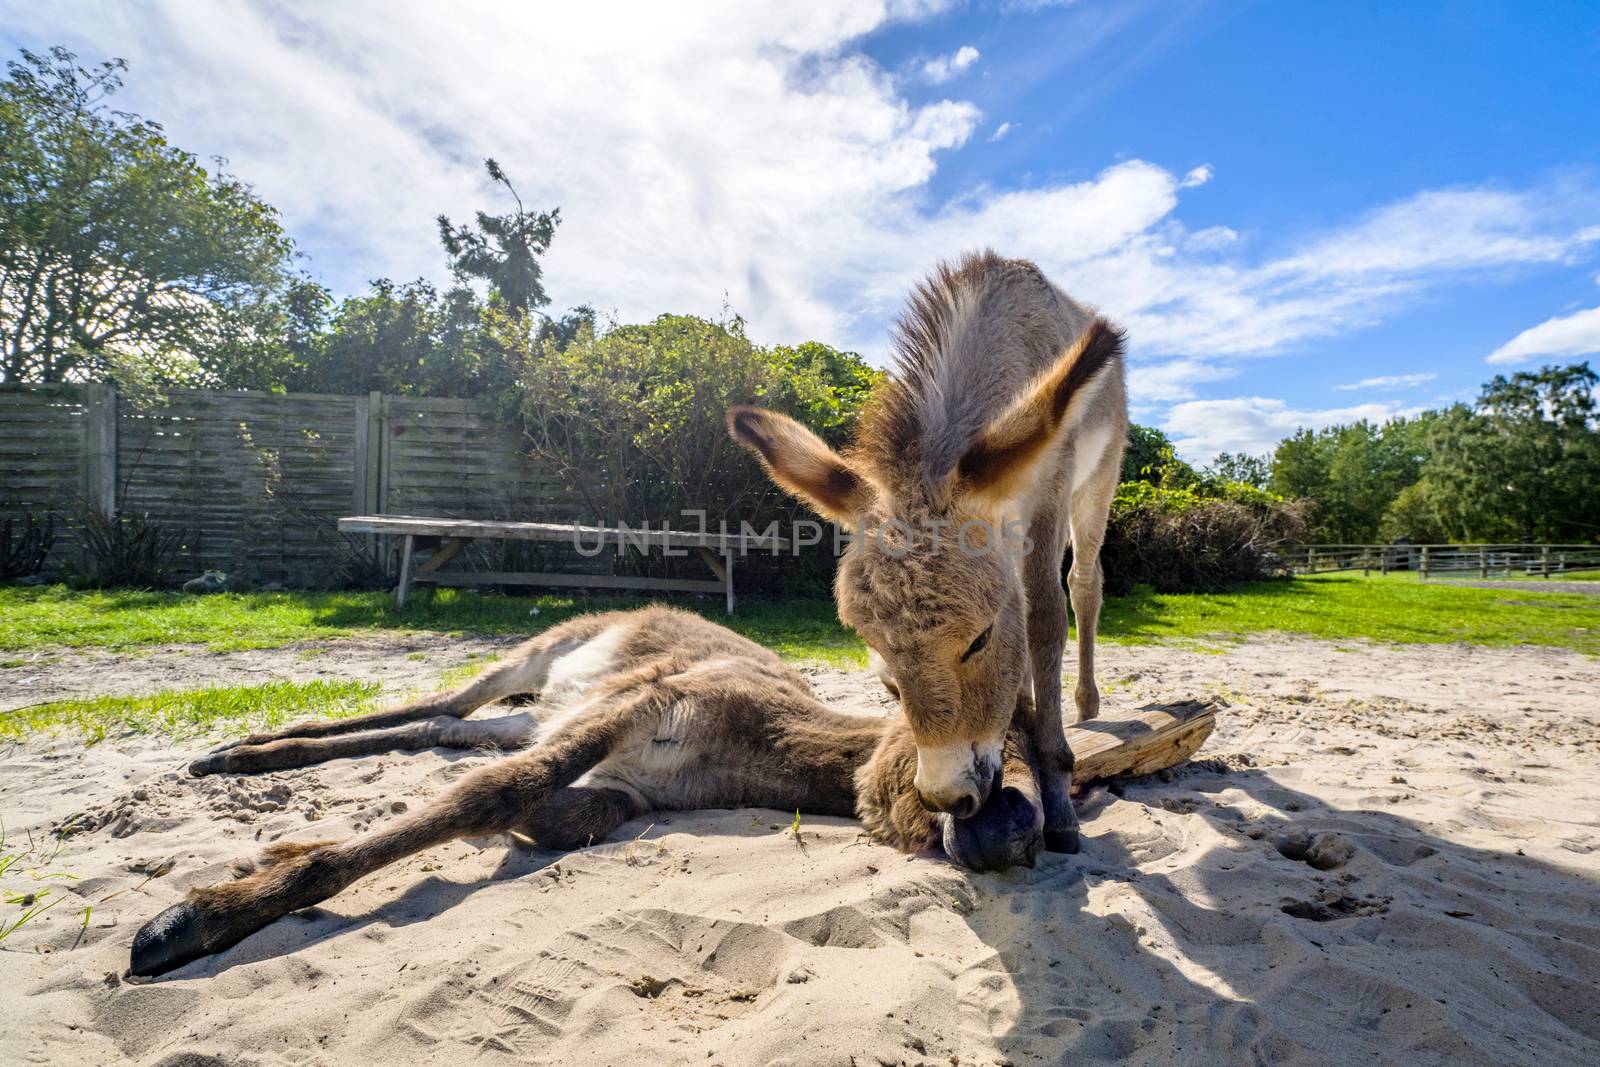 Donkey friends in the sand at a farm by Sportactive